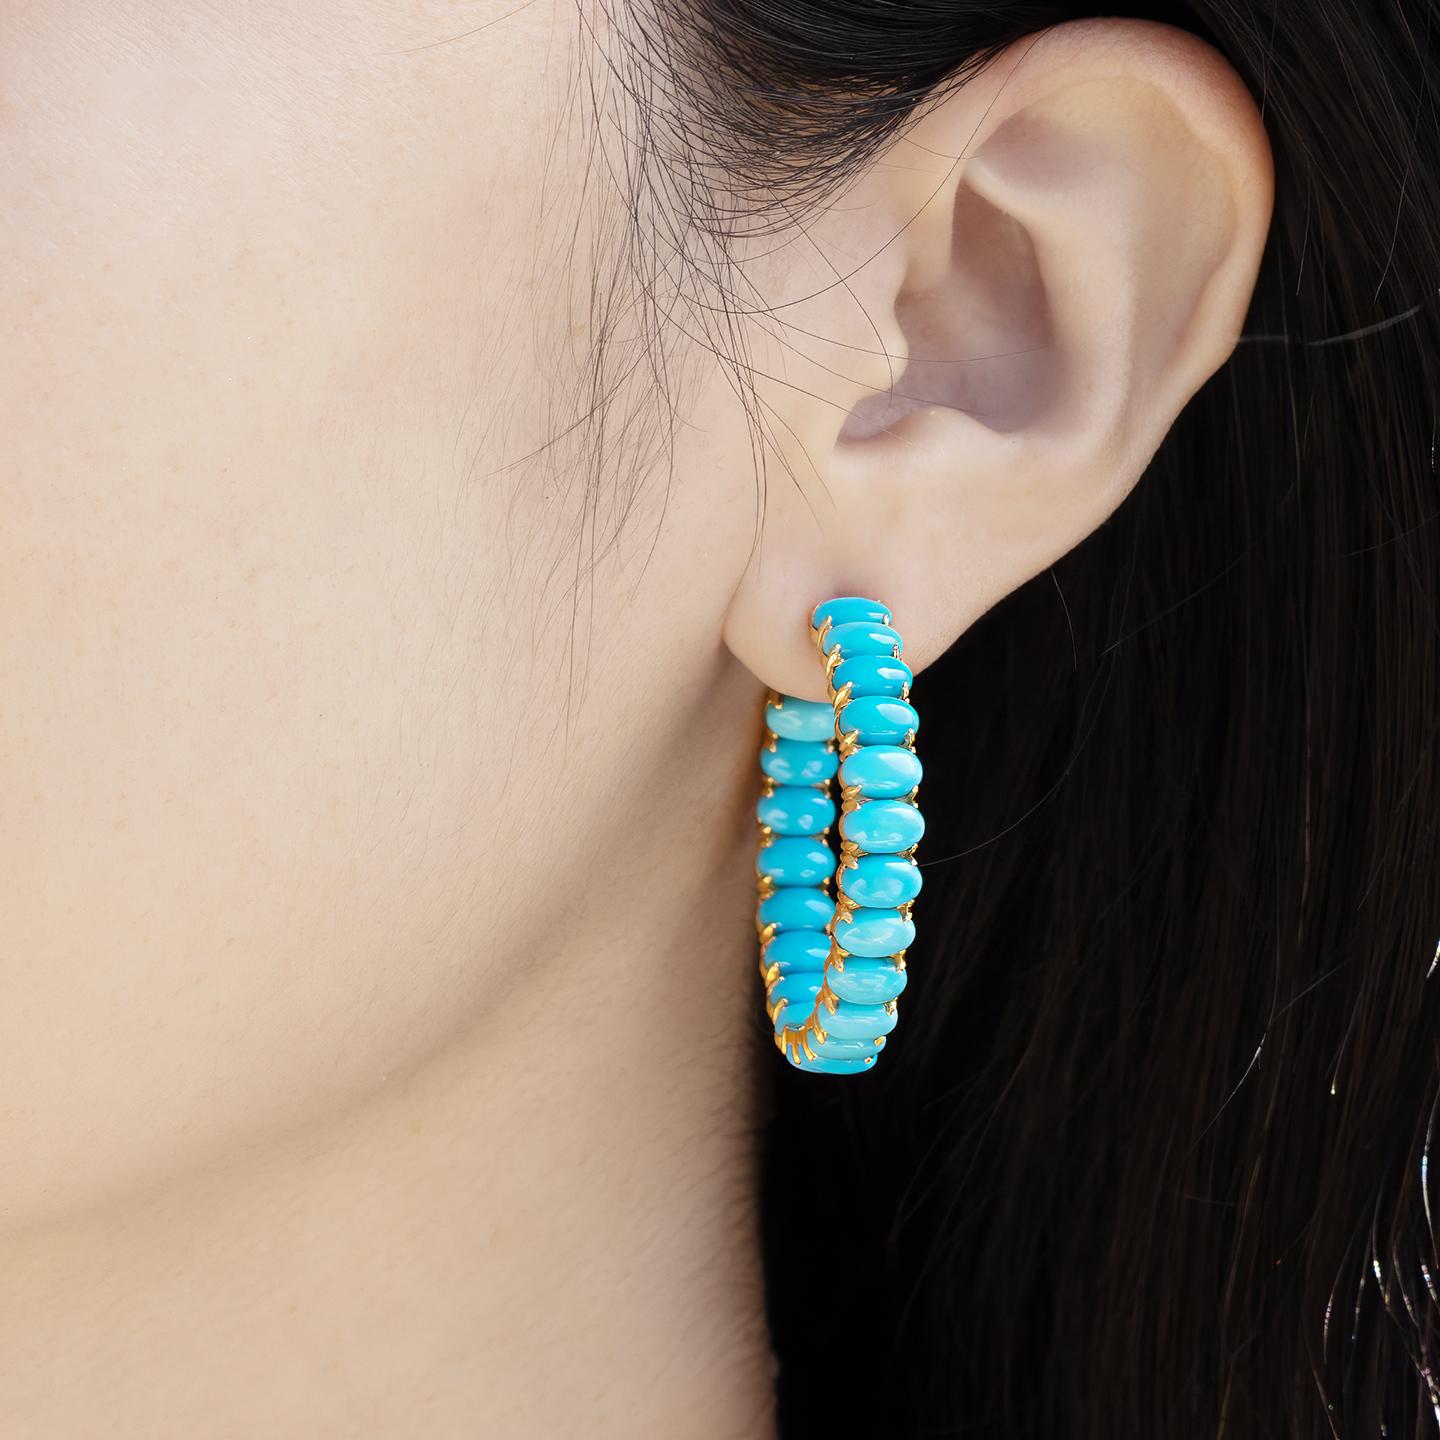 Nina Zhou's 16ct Turquoise Inside-out Hoop Earrings in 14k yellow gold encapsulate vibrant elegance with a modern twist. Crafted meticulously, these stunning hoops showcase richly hued, 10-carat turquoise gemstones set both inside and outside,